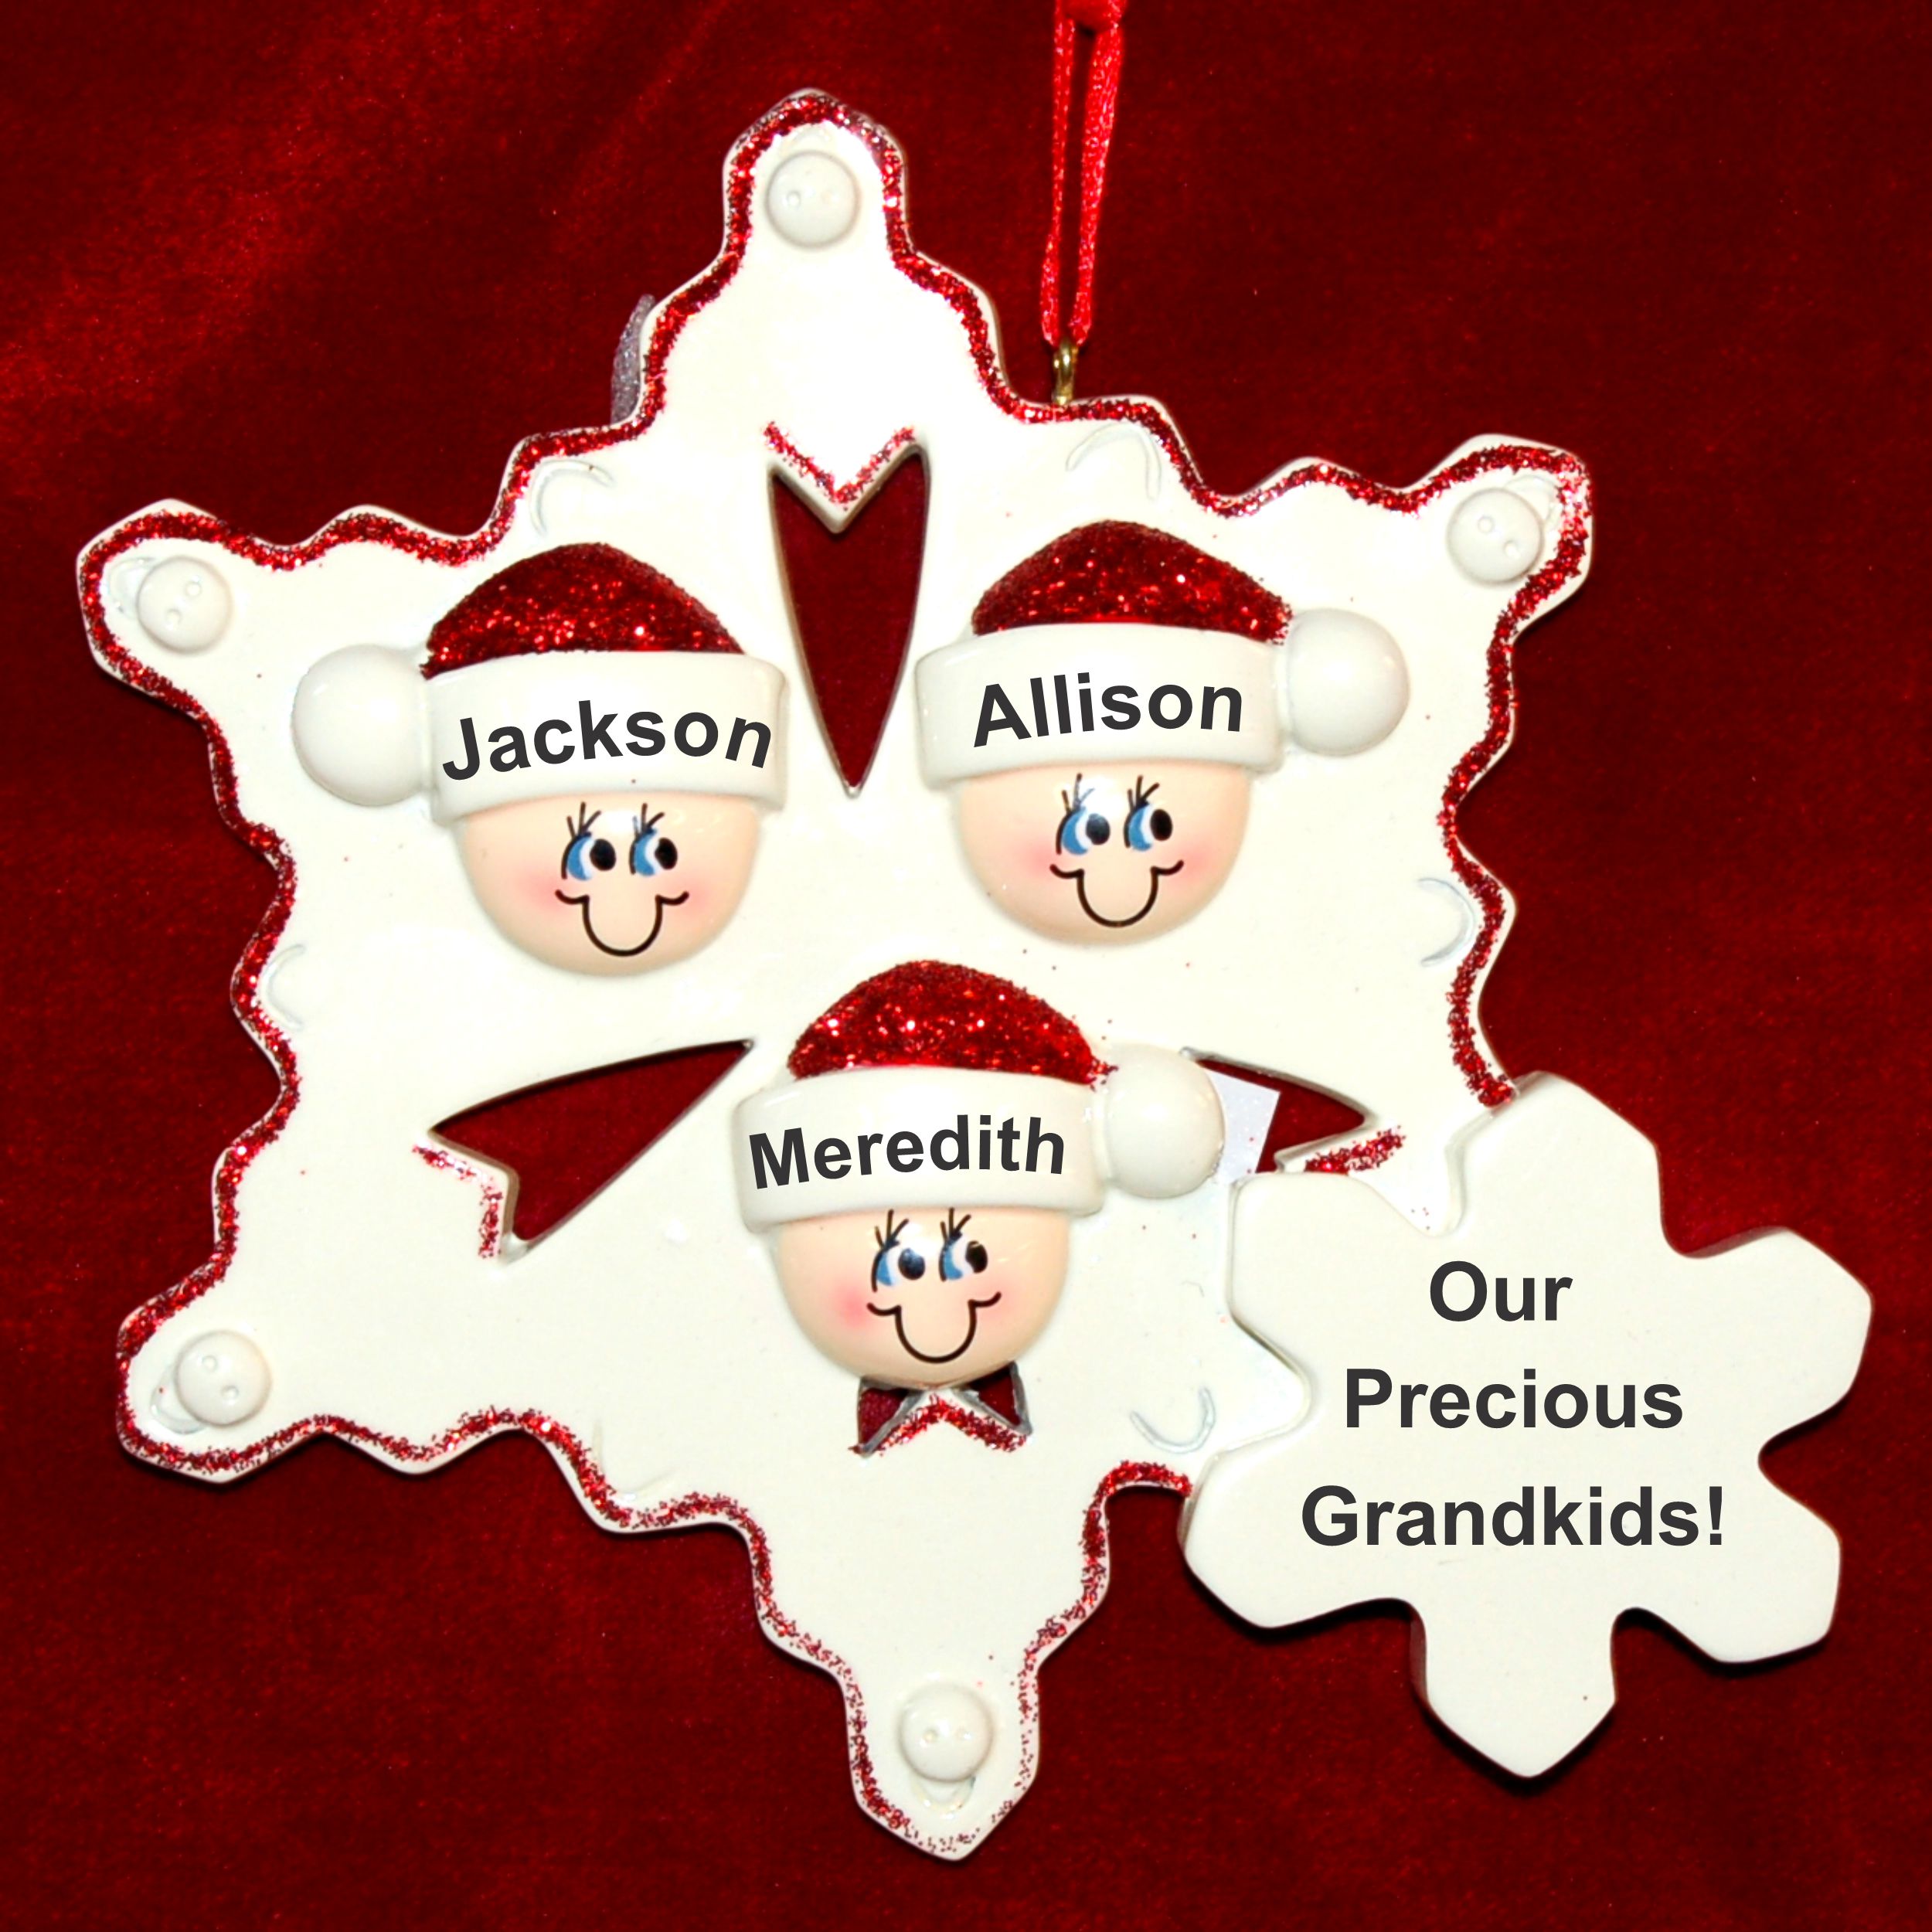 Grandparents Christmas Ornament Snowflakes 3 Grandkids Personalized by RussellRhodes.com